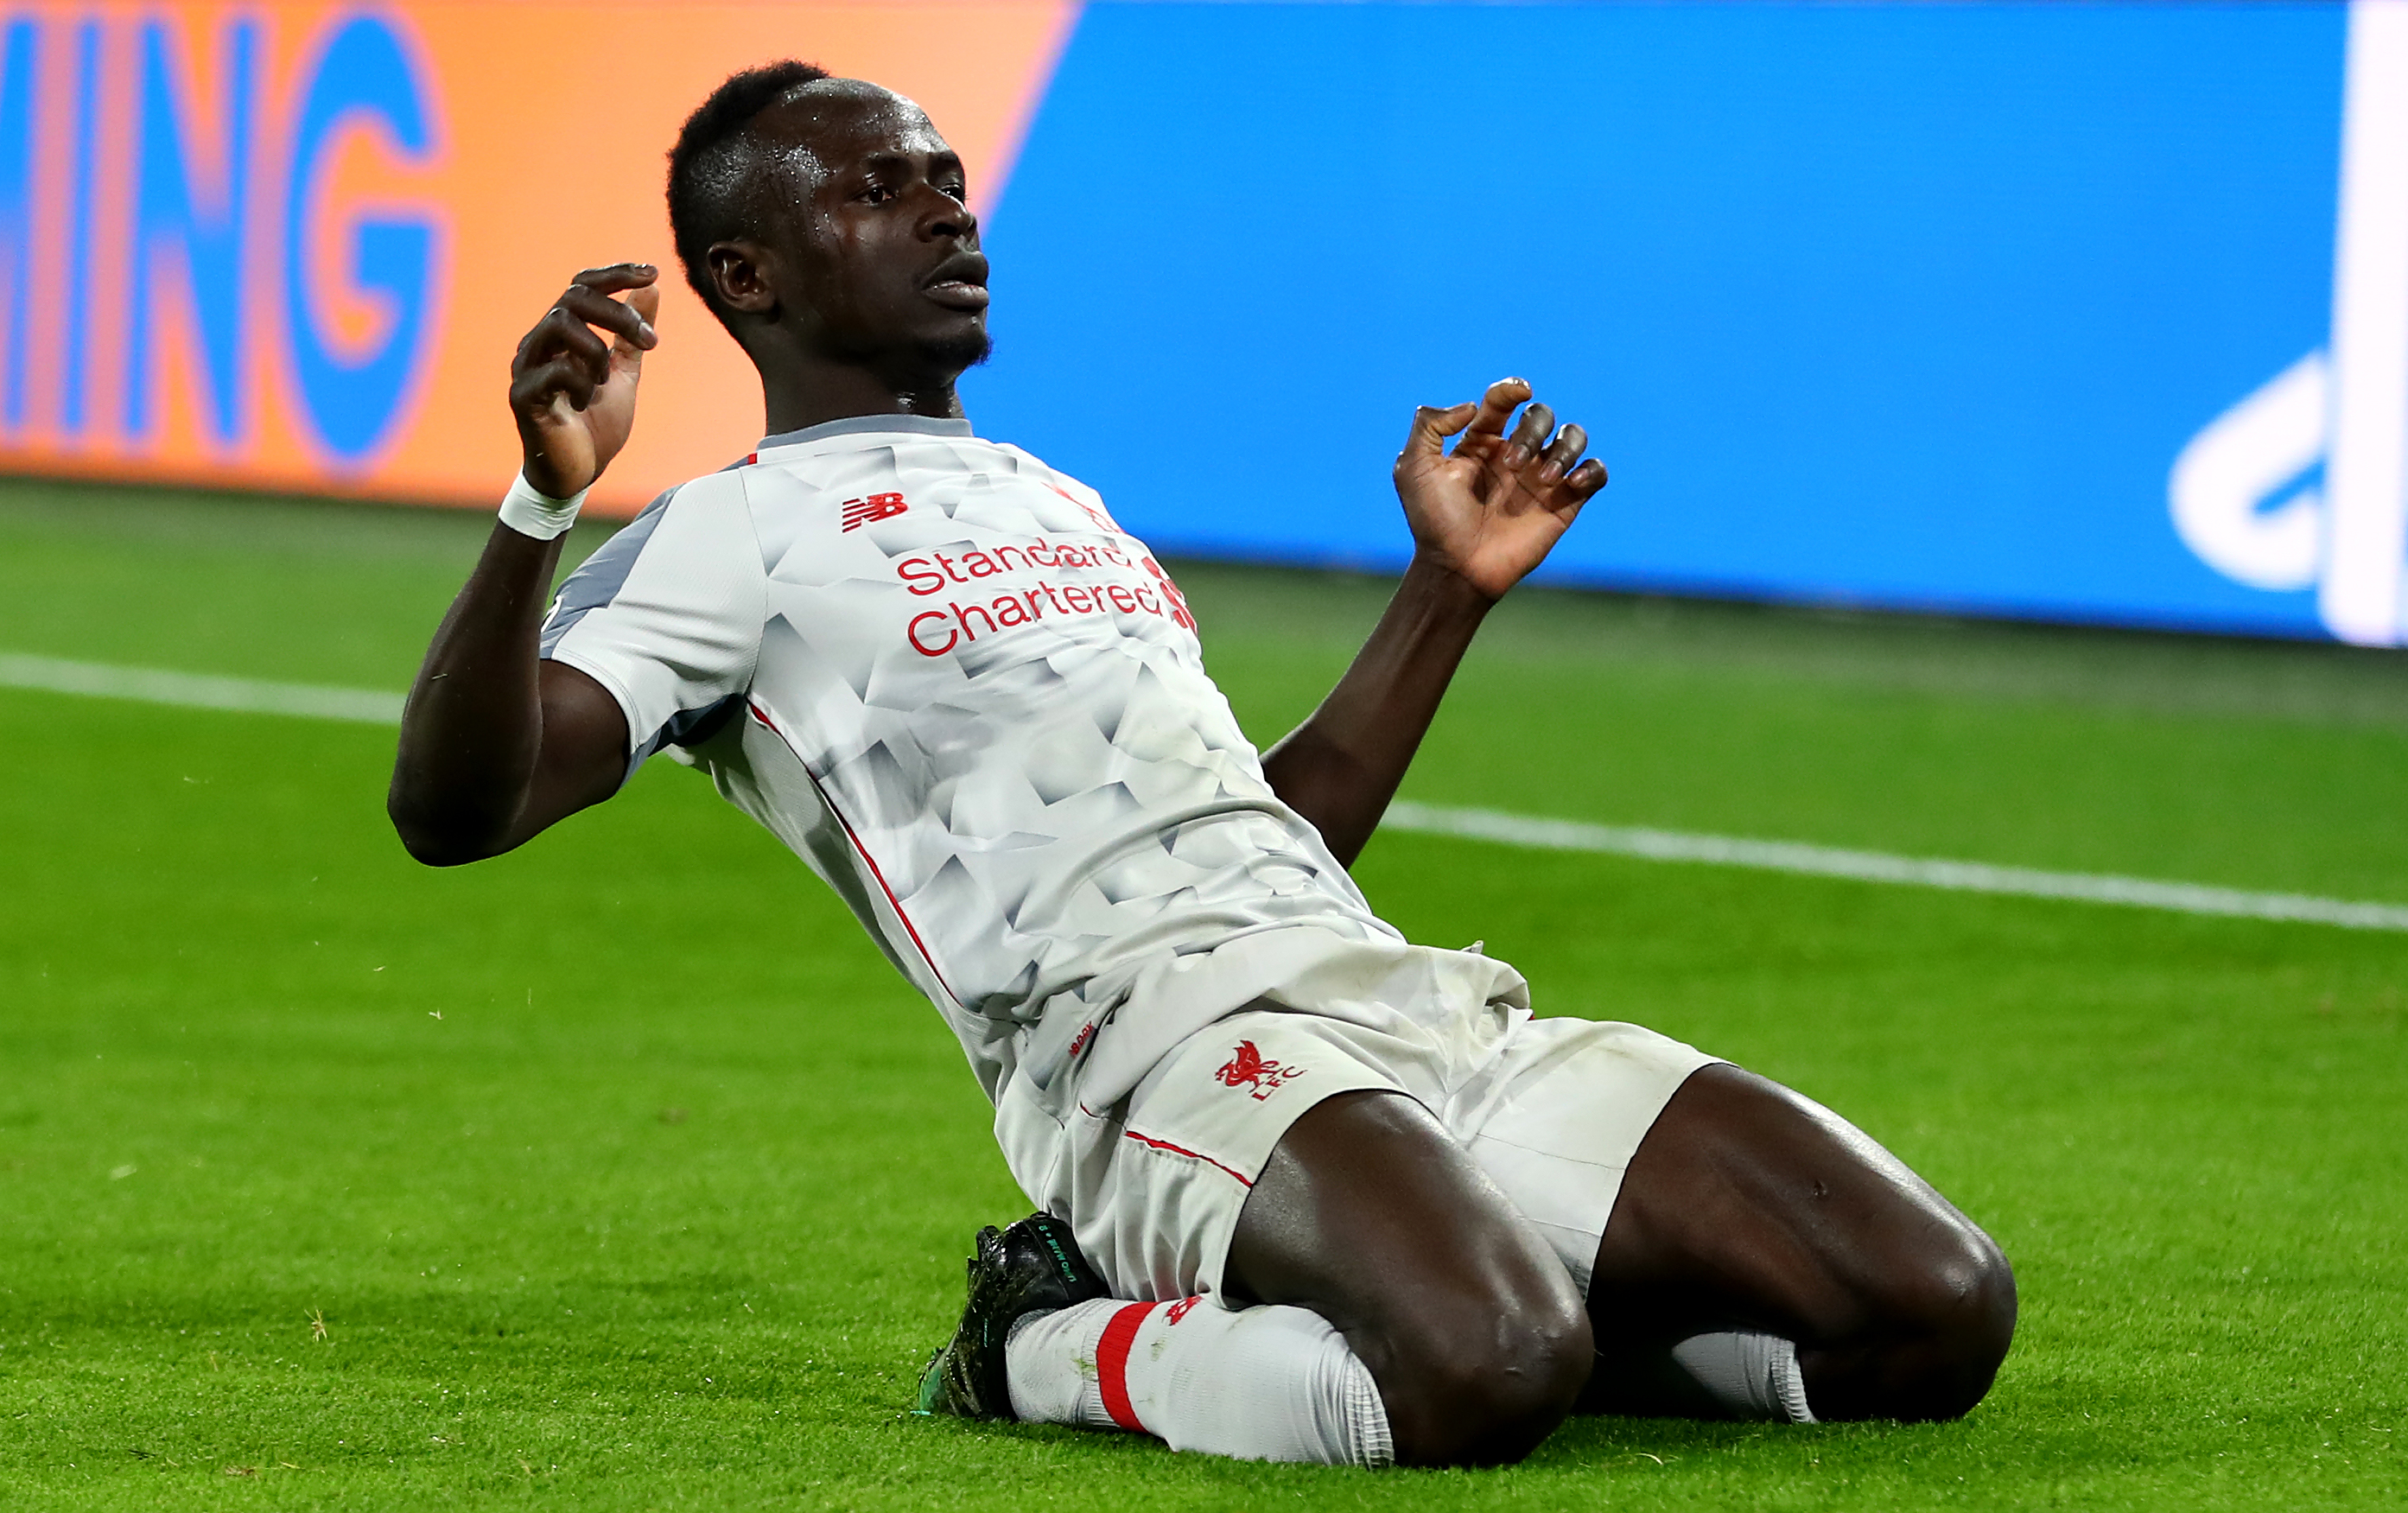 Mane can be the star of the show for Liverpool and their title chase. (Photo by Lars Baron/Bongarts/Getty Images)